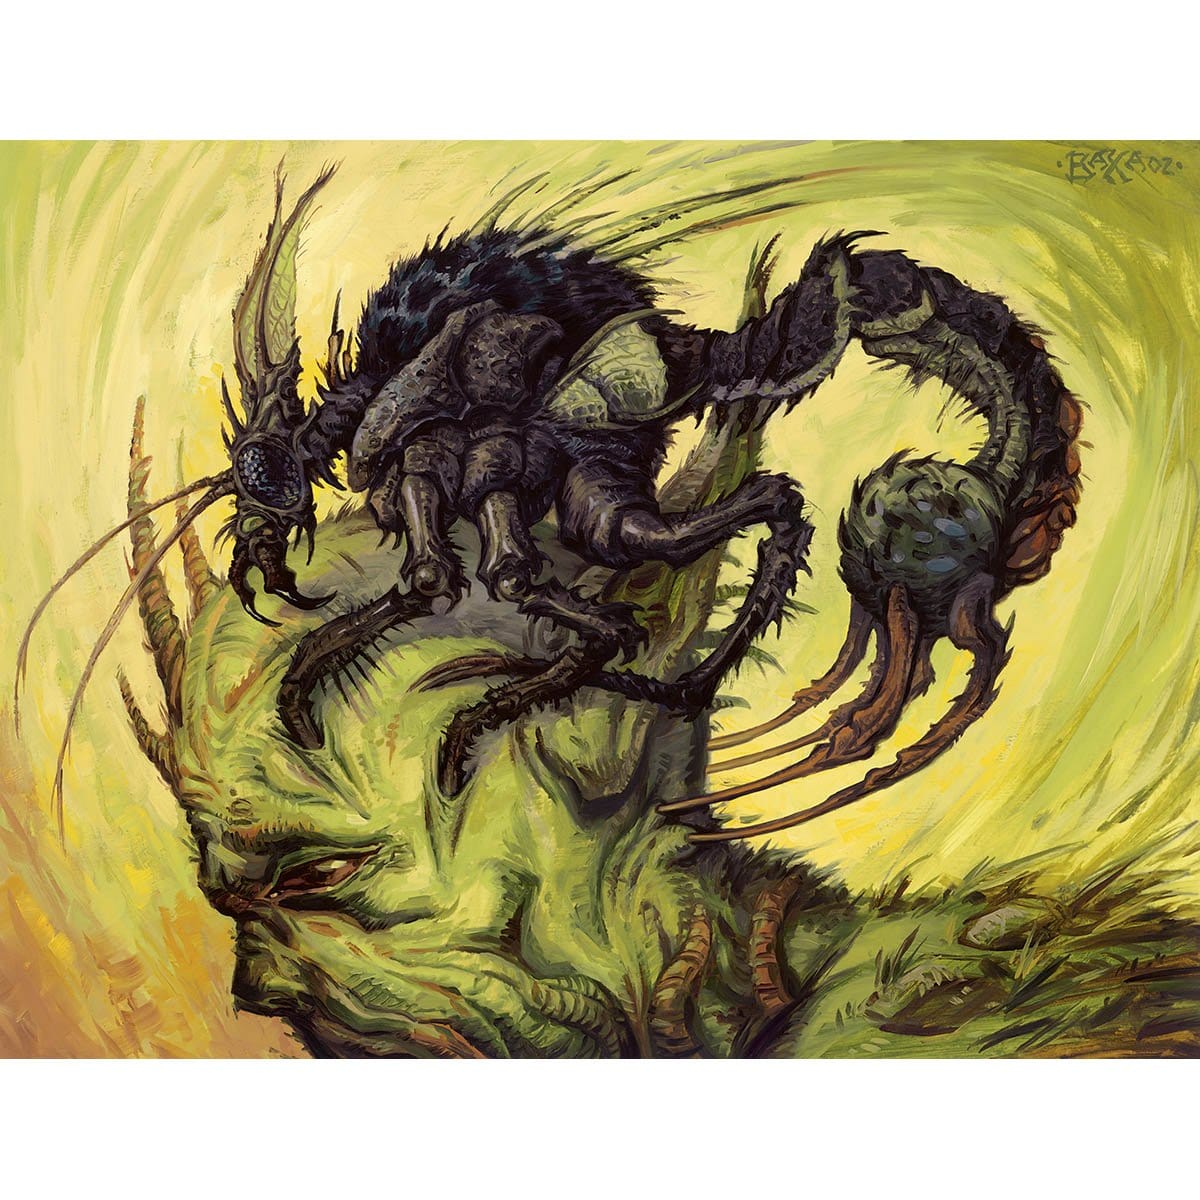 Wirewood Symbiote Print - Print - Original Magic Art - Accessories for Magic the Gathering and other card games